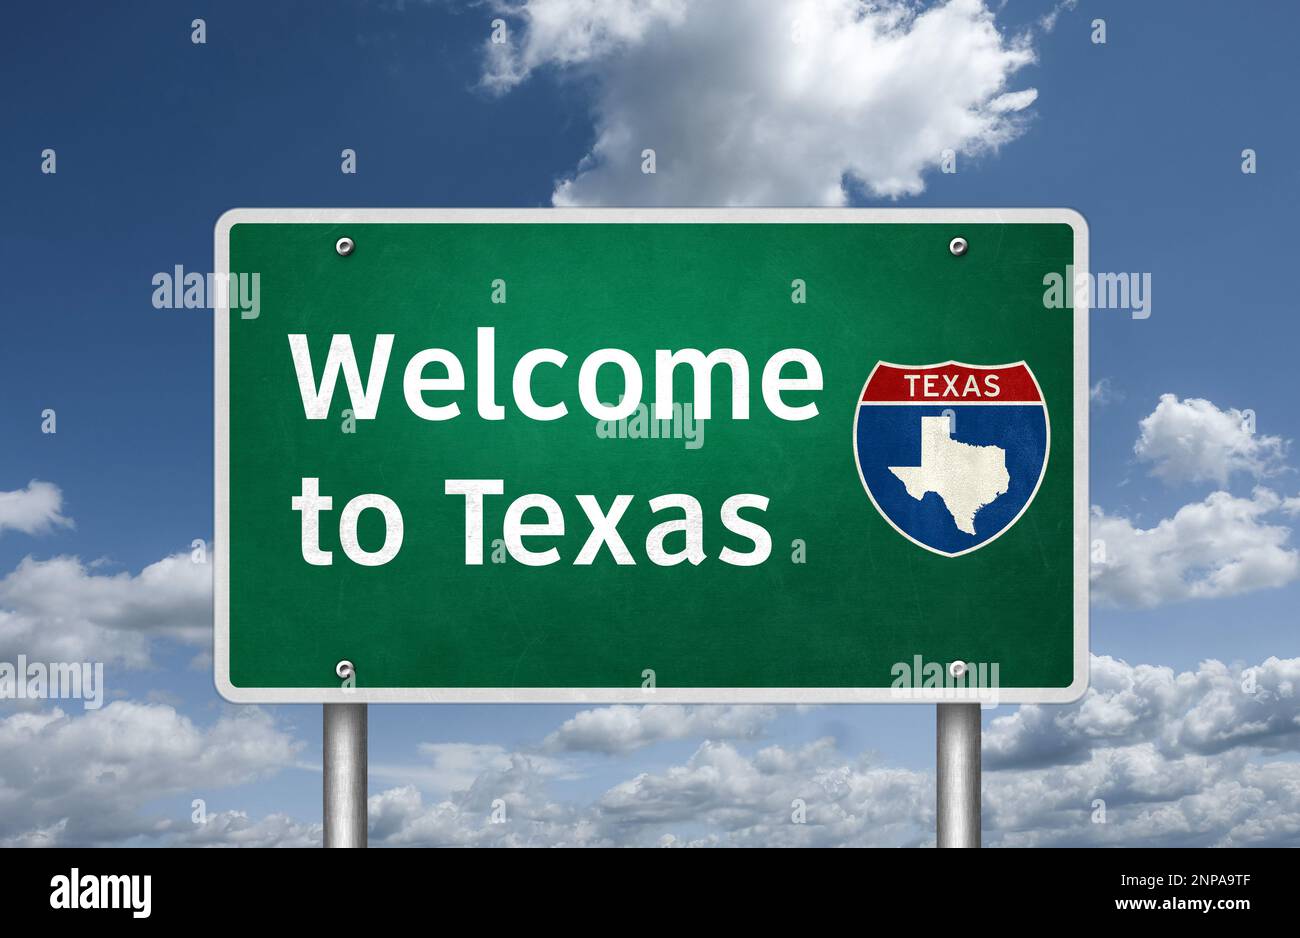 Welcome to the US State of Texas - road sign message Stock Photo